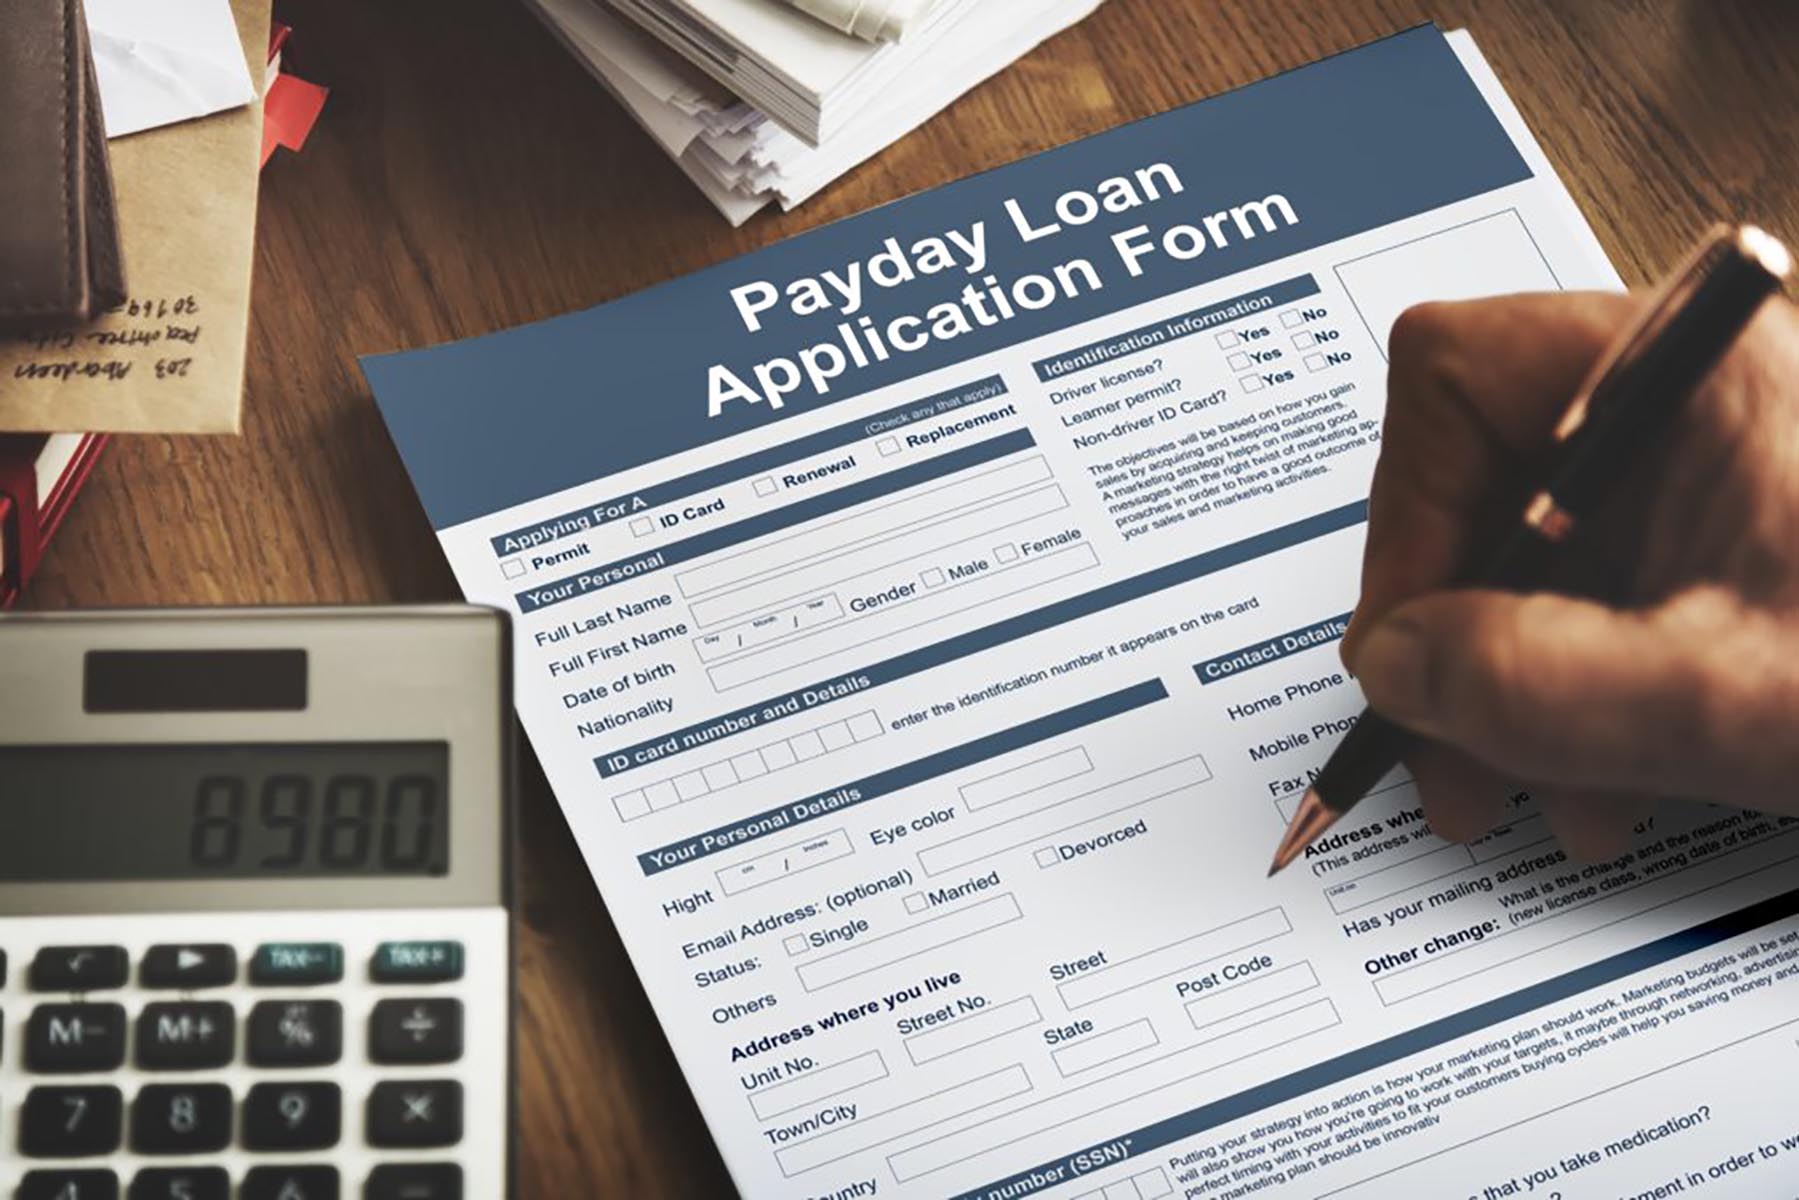 learn about new policies for payday loans